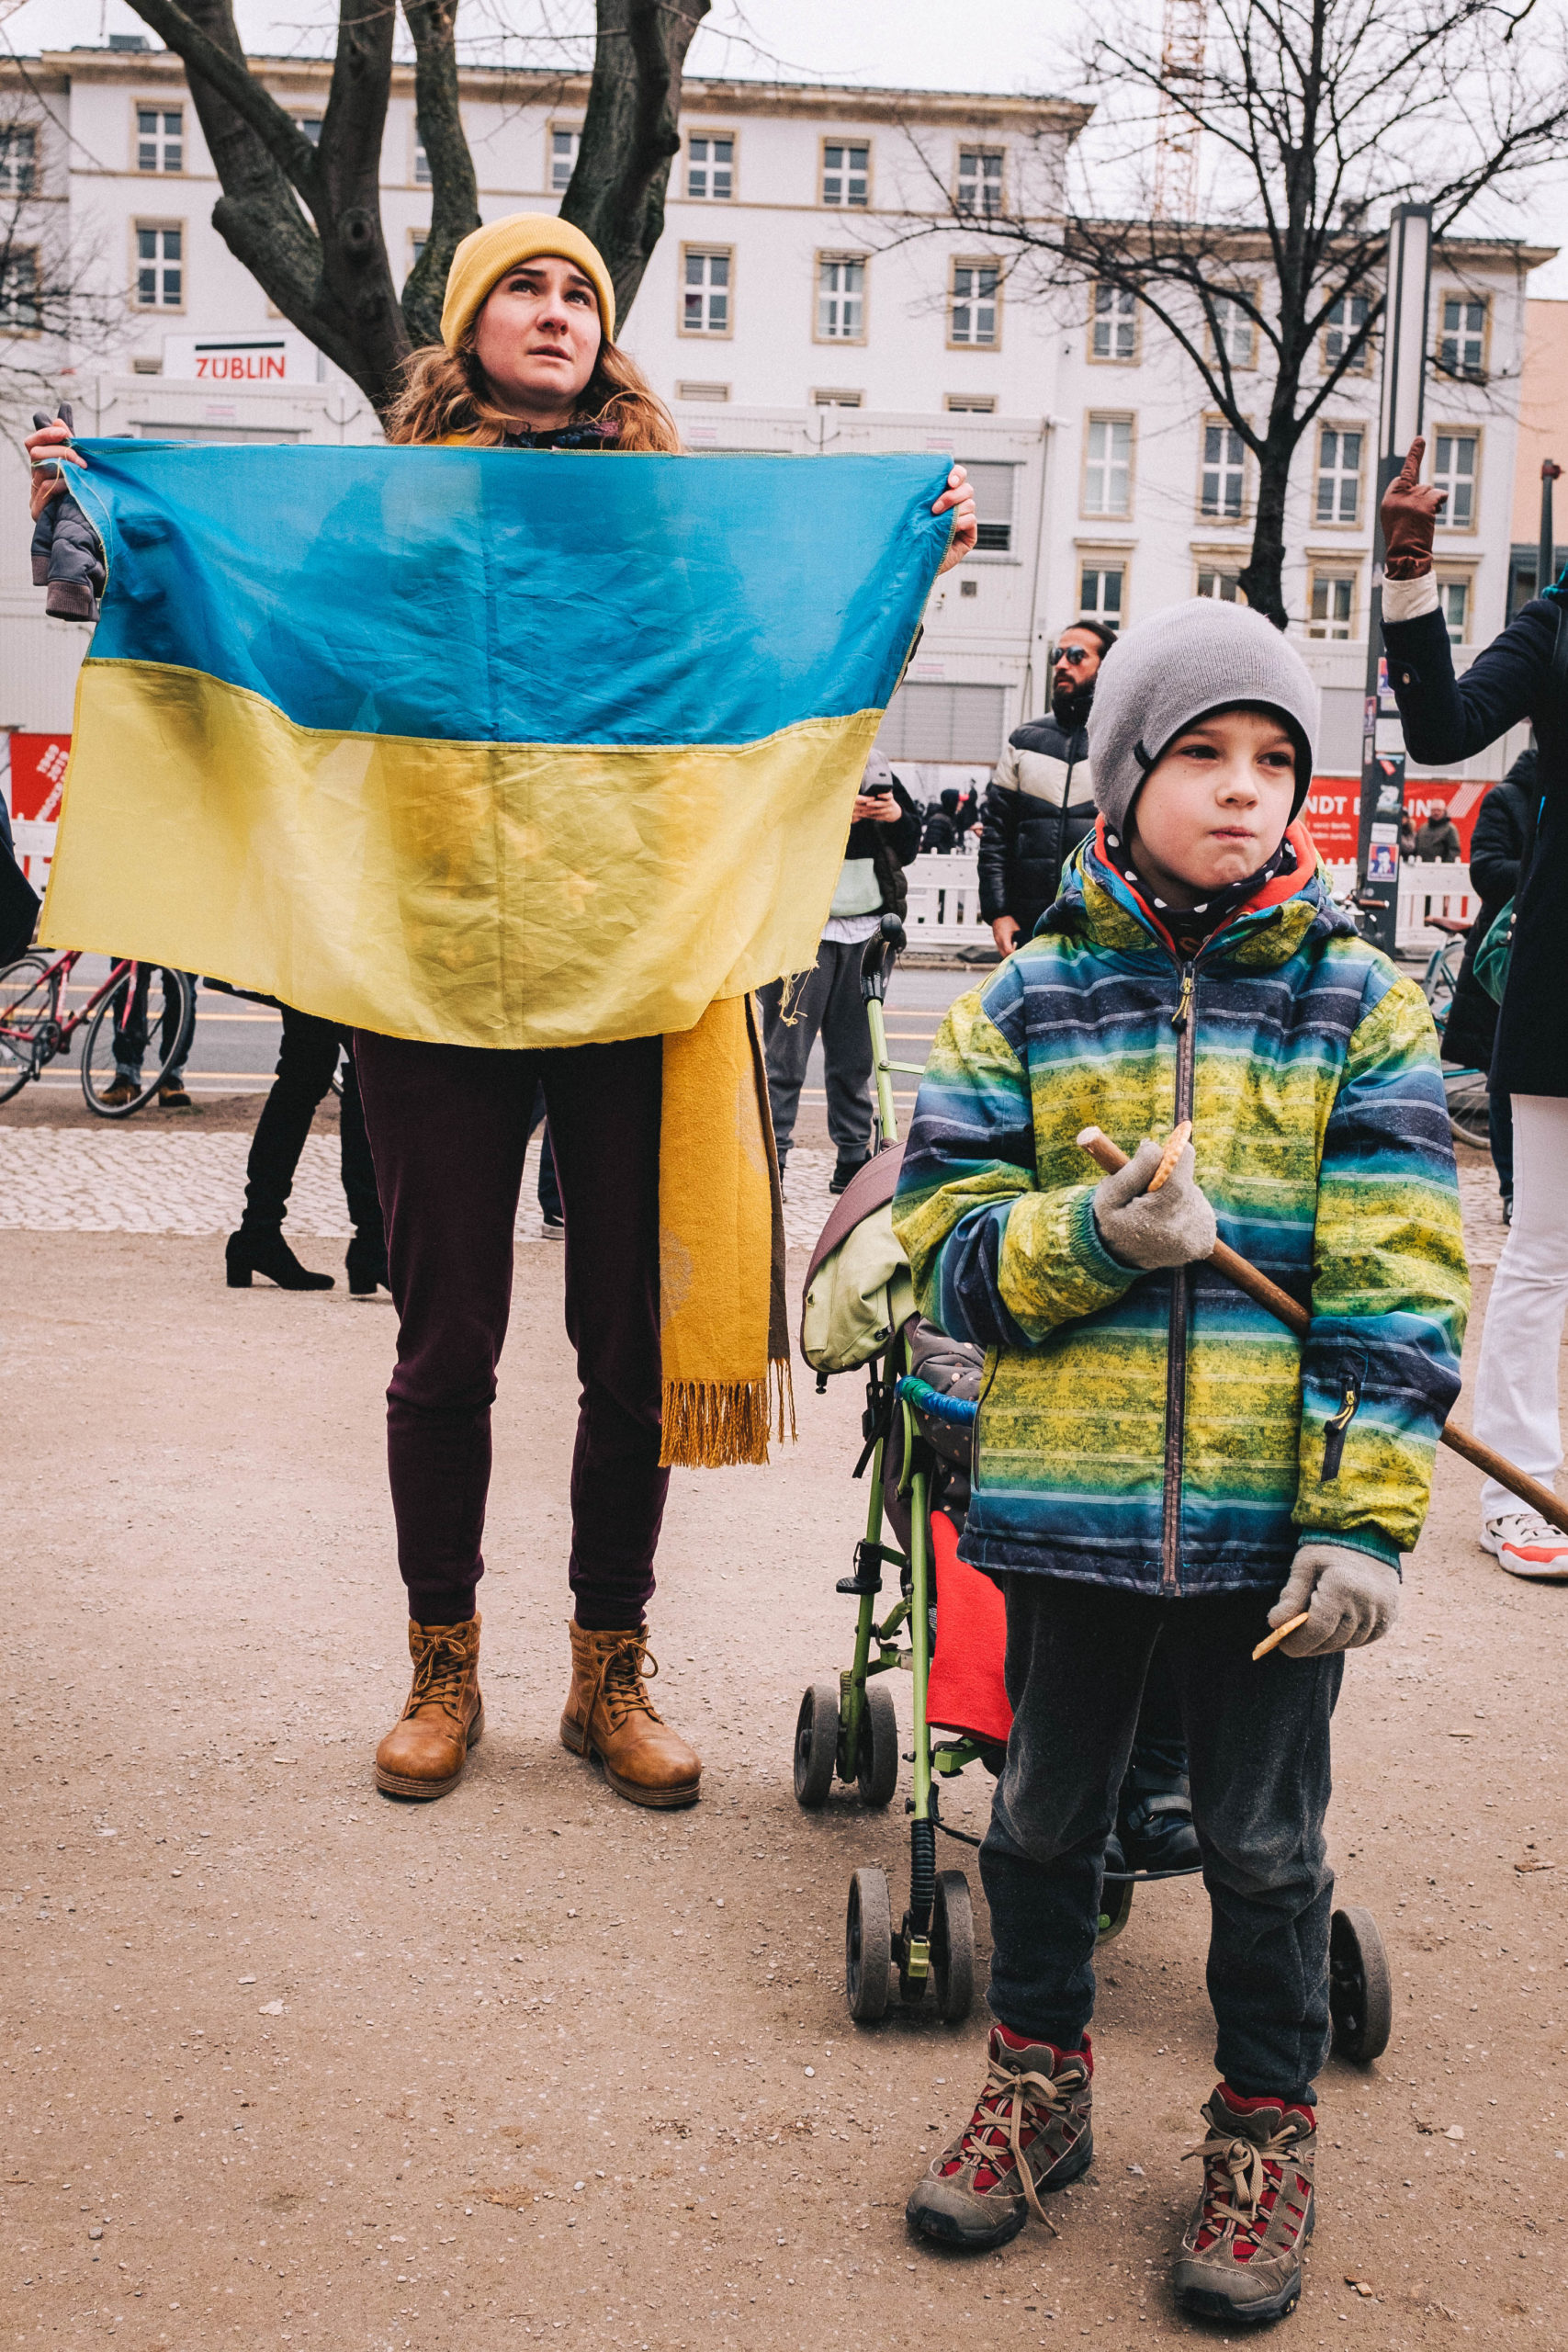 A woman holding up Ukrainian flag with a kid outside the russian embassy in Berlin